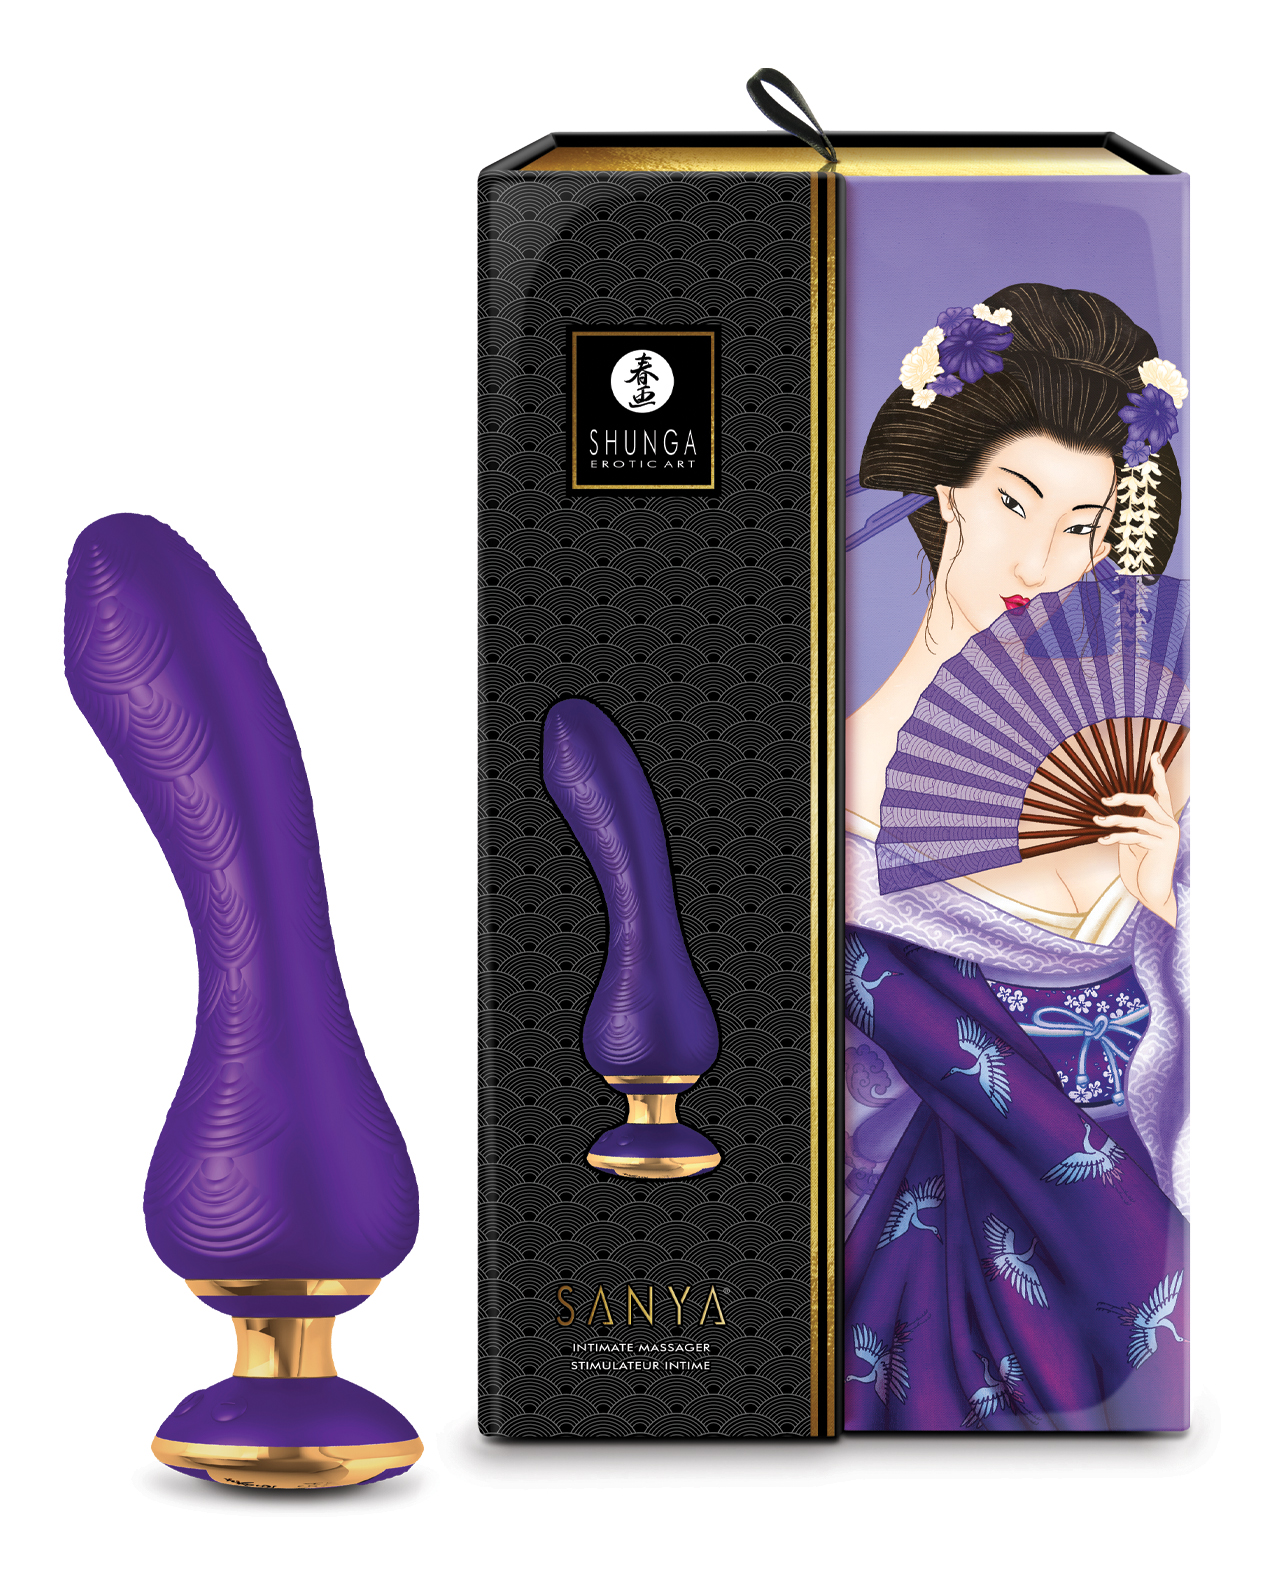 Shunga Sanya sits next to the package which has a image of the toy and a woman using a hand fan